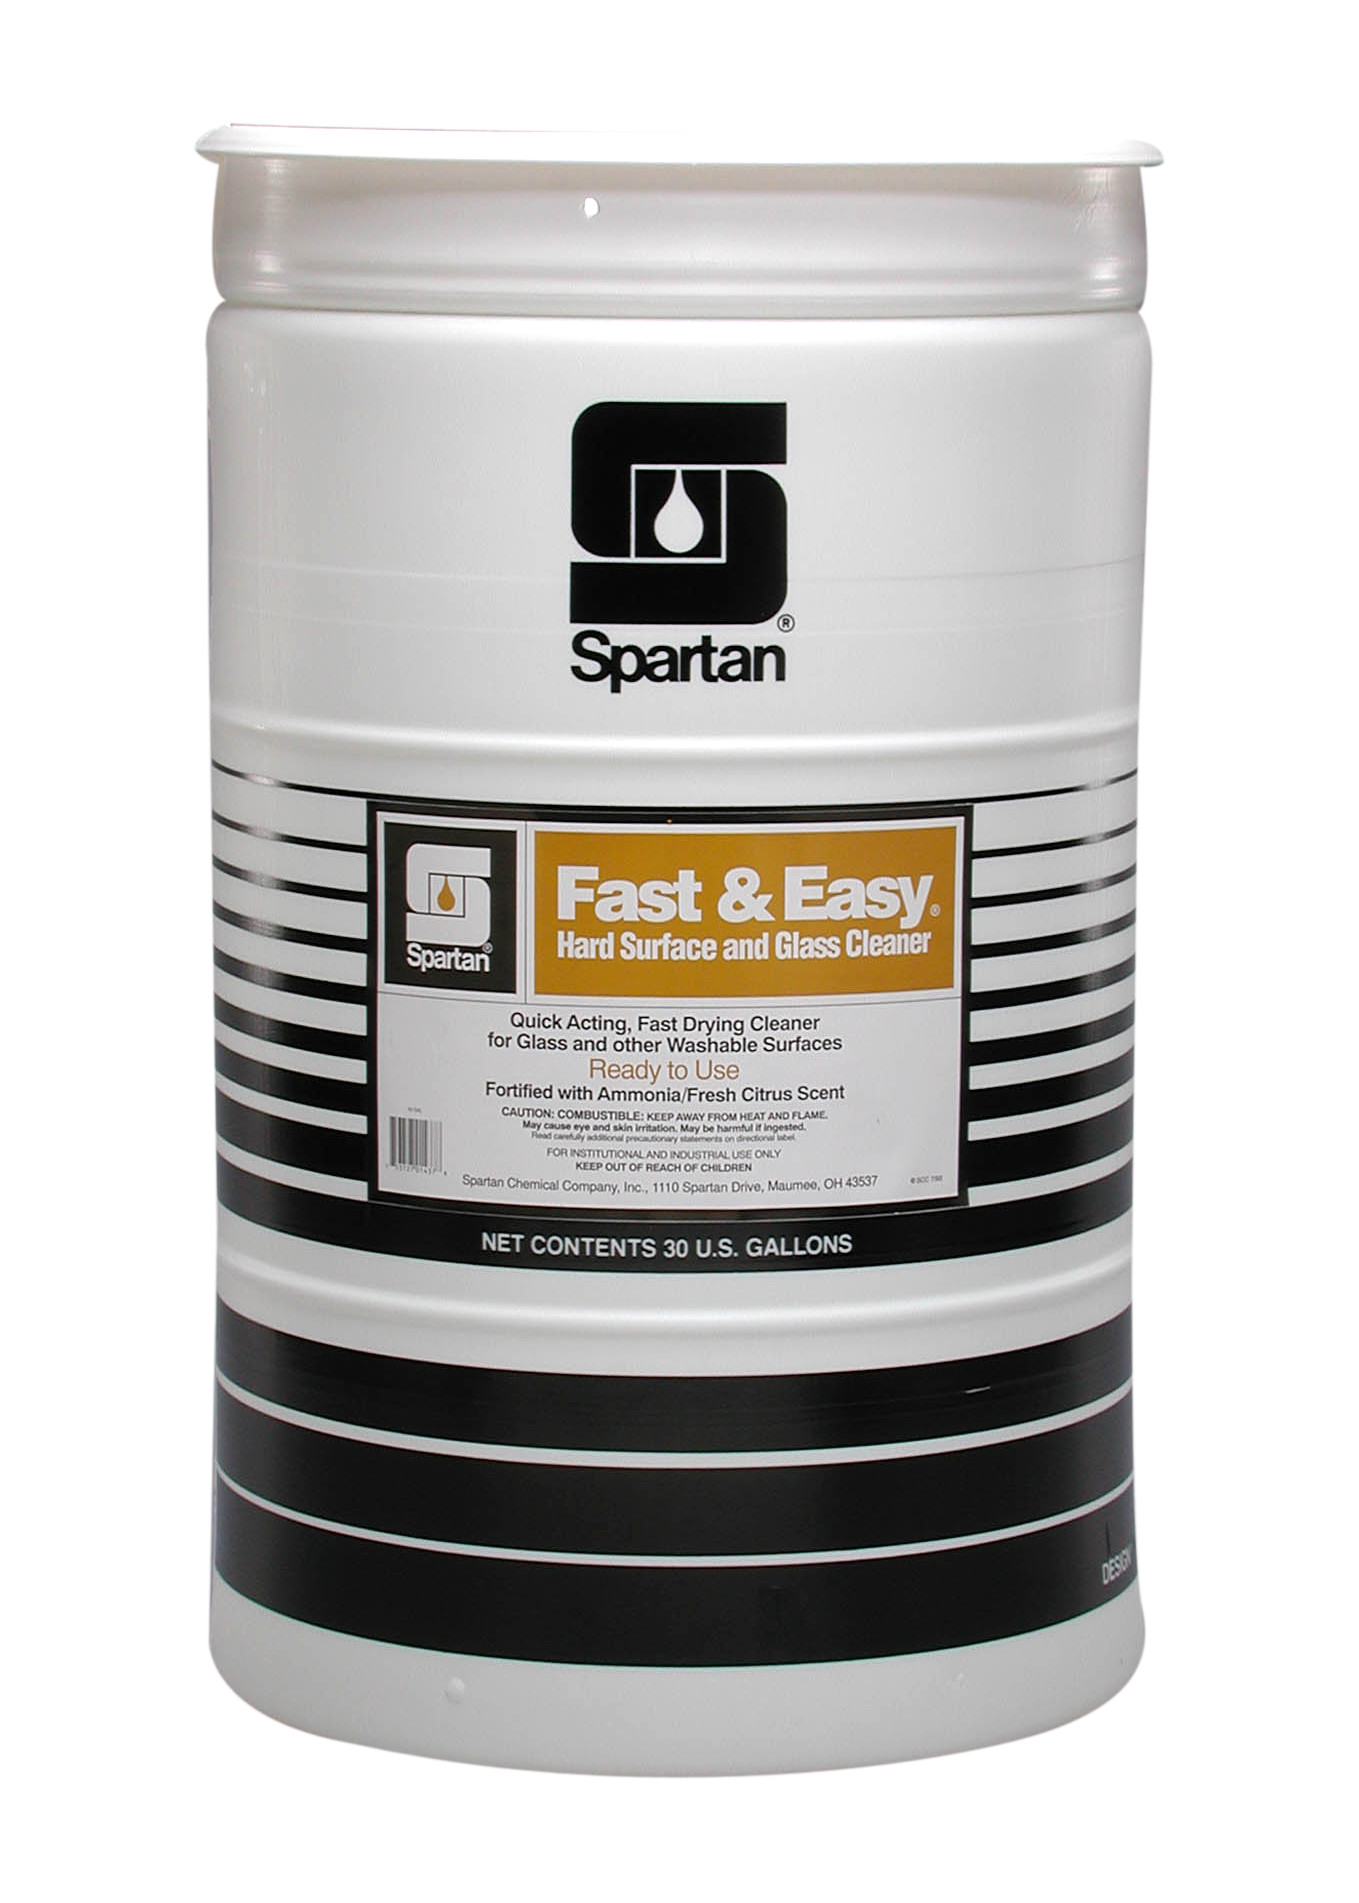 Spartan Chemical Company Fast & Easy, 30 GAL DRUM